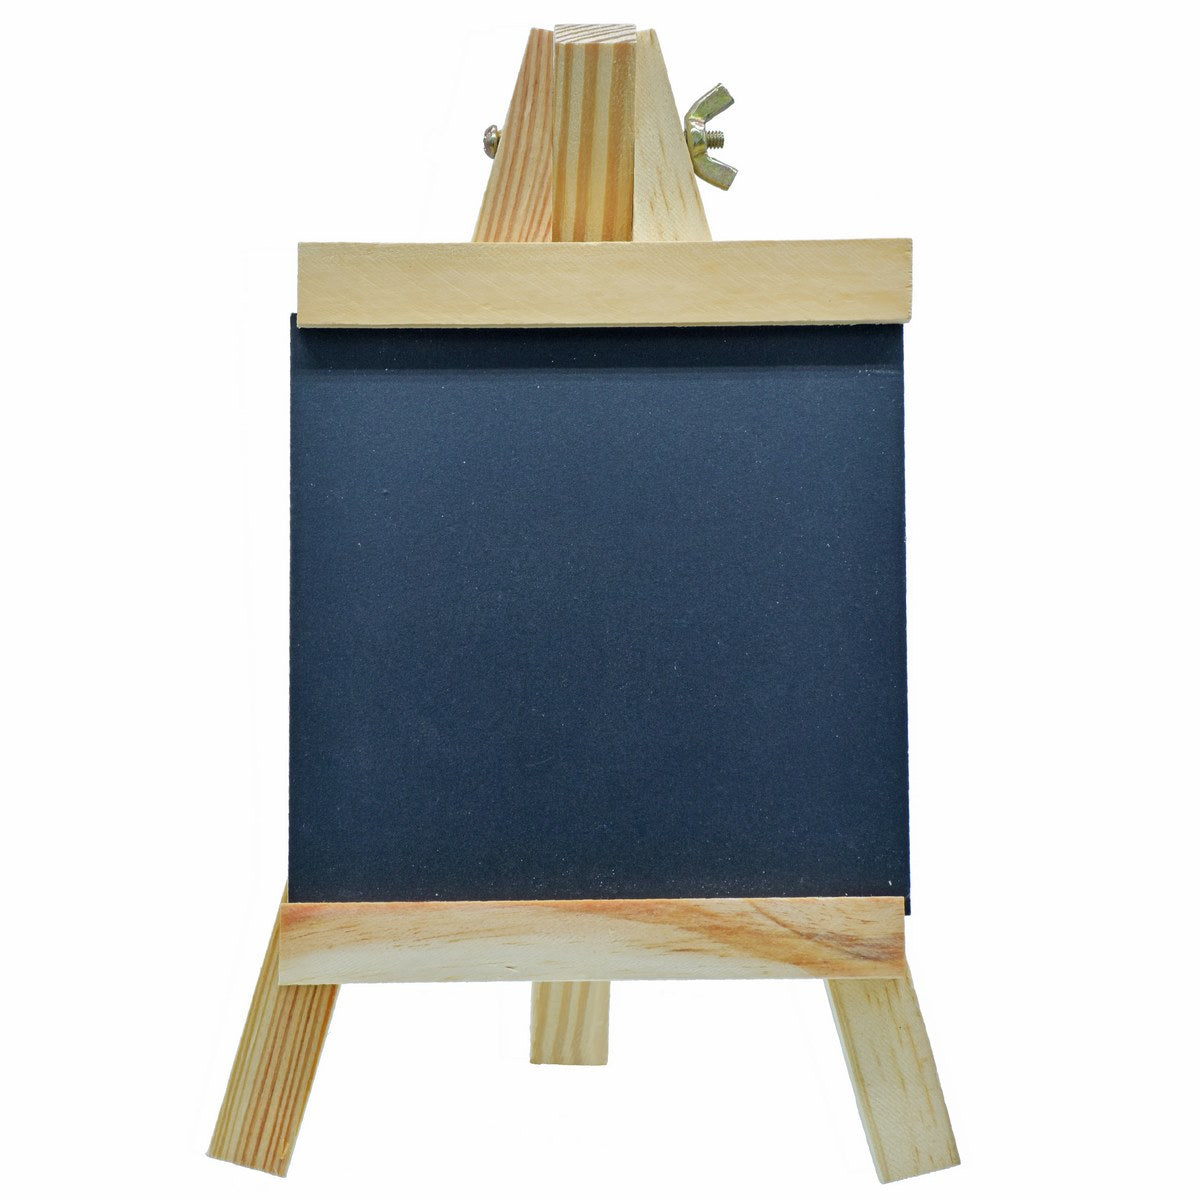 jags-mumbai Easel & Canvas Drawing Board With Easel Stand Black 12x23